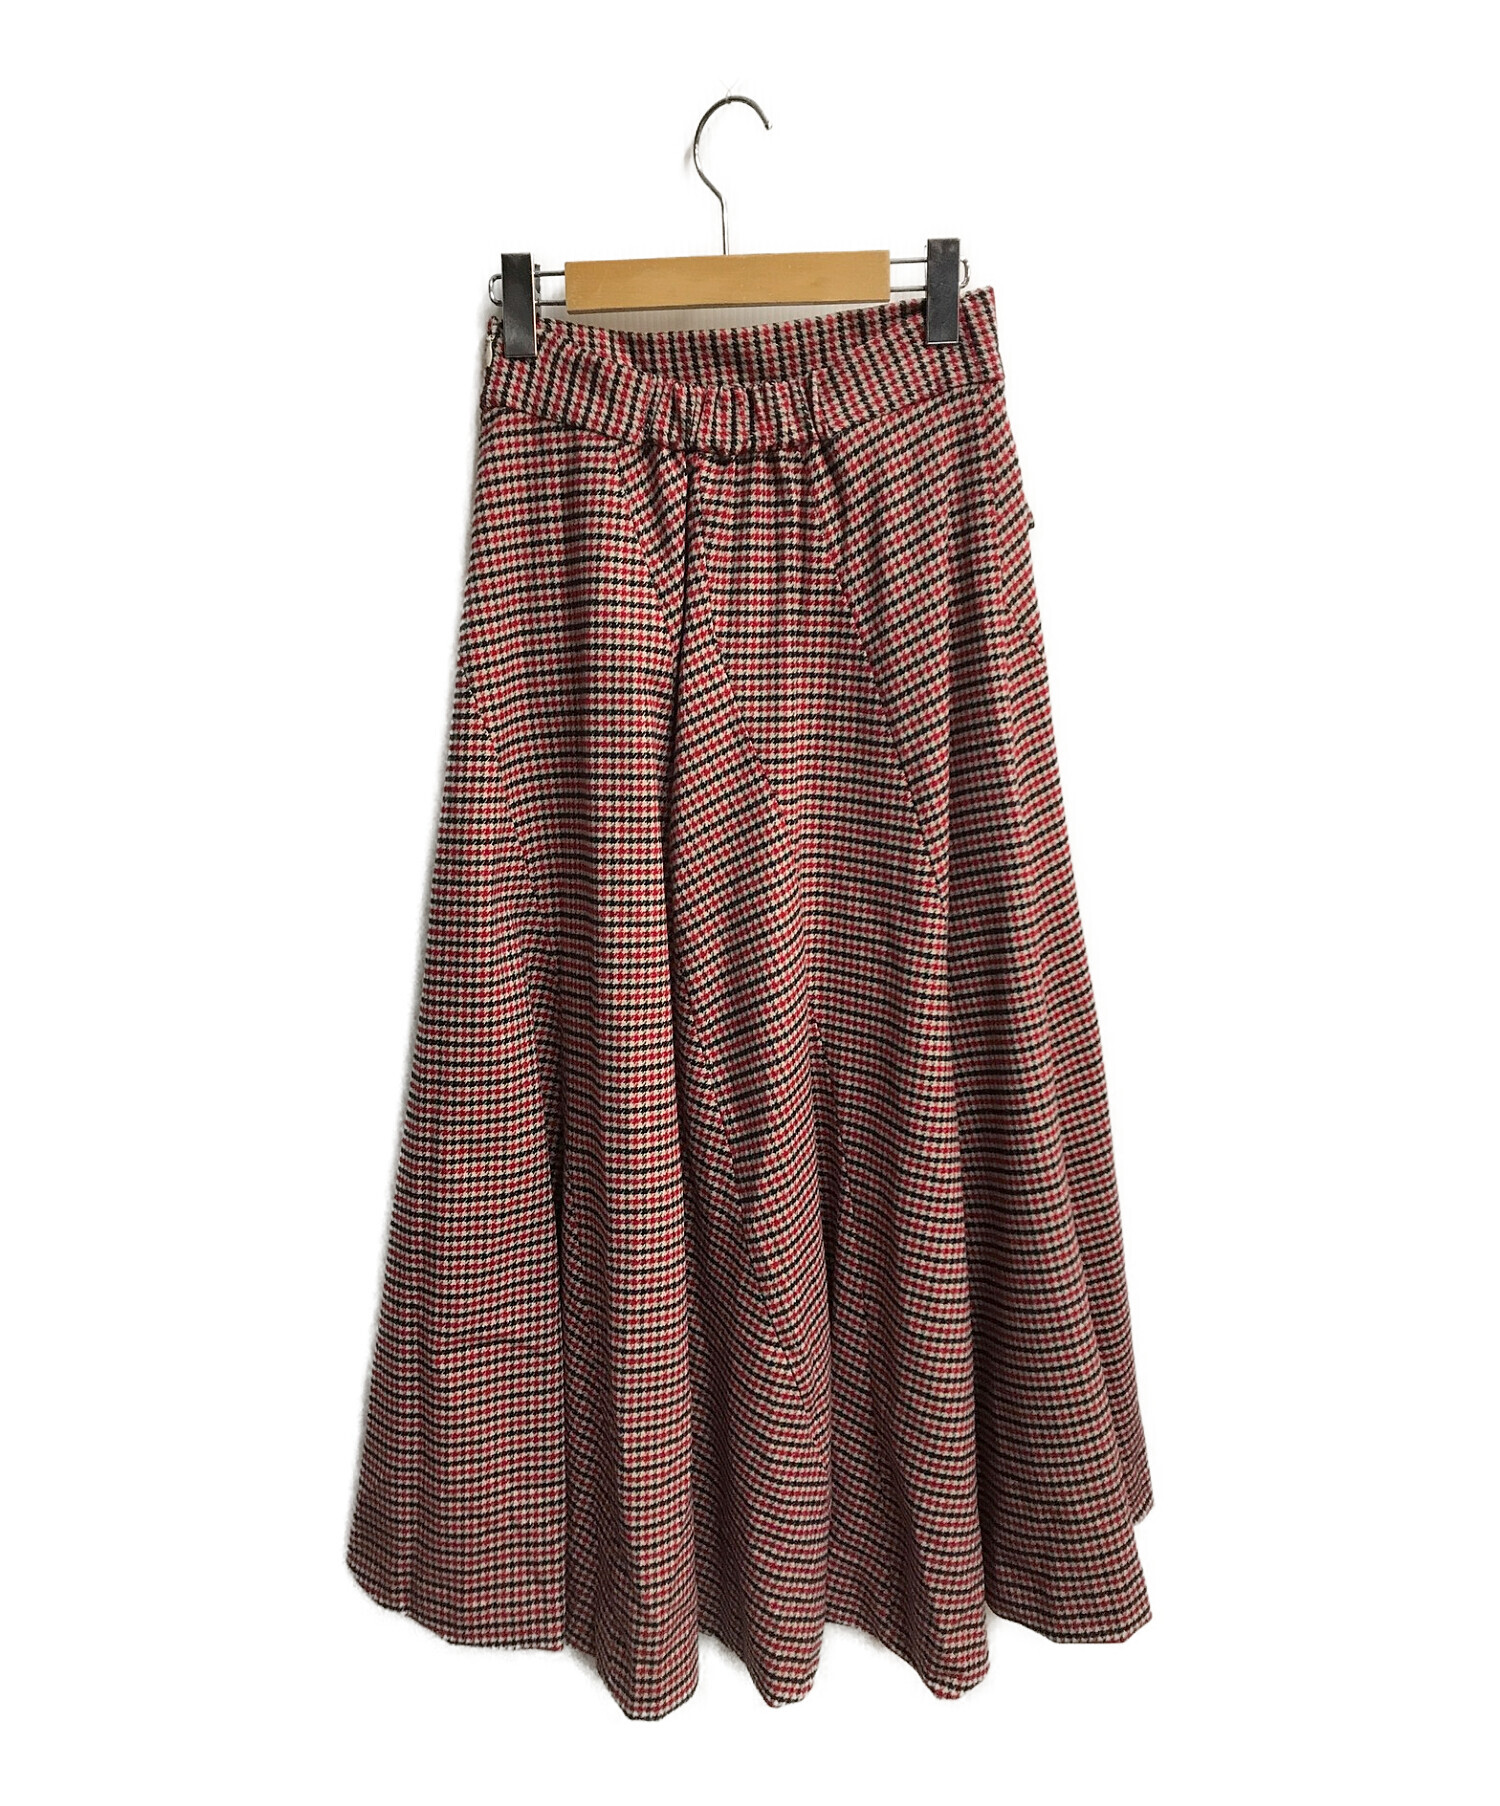 Her lip to (ハーリップトゥ) High-rise Shell Checked Skirt レッド サイズ:M